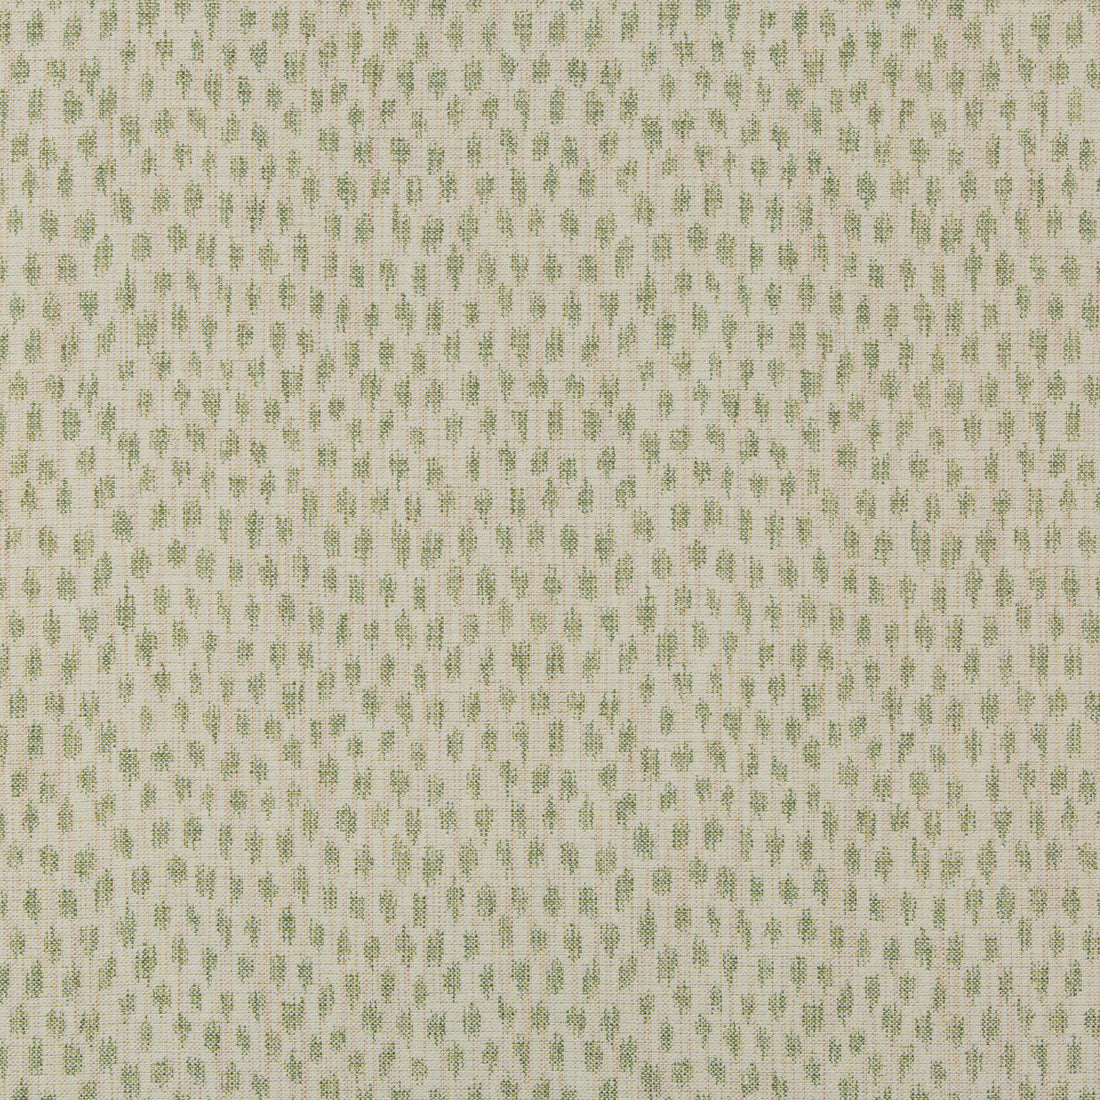 Kemble fabric in sage color - pattern BFC-3683.30.0 - by Lee Jofa in the Blithfield collection